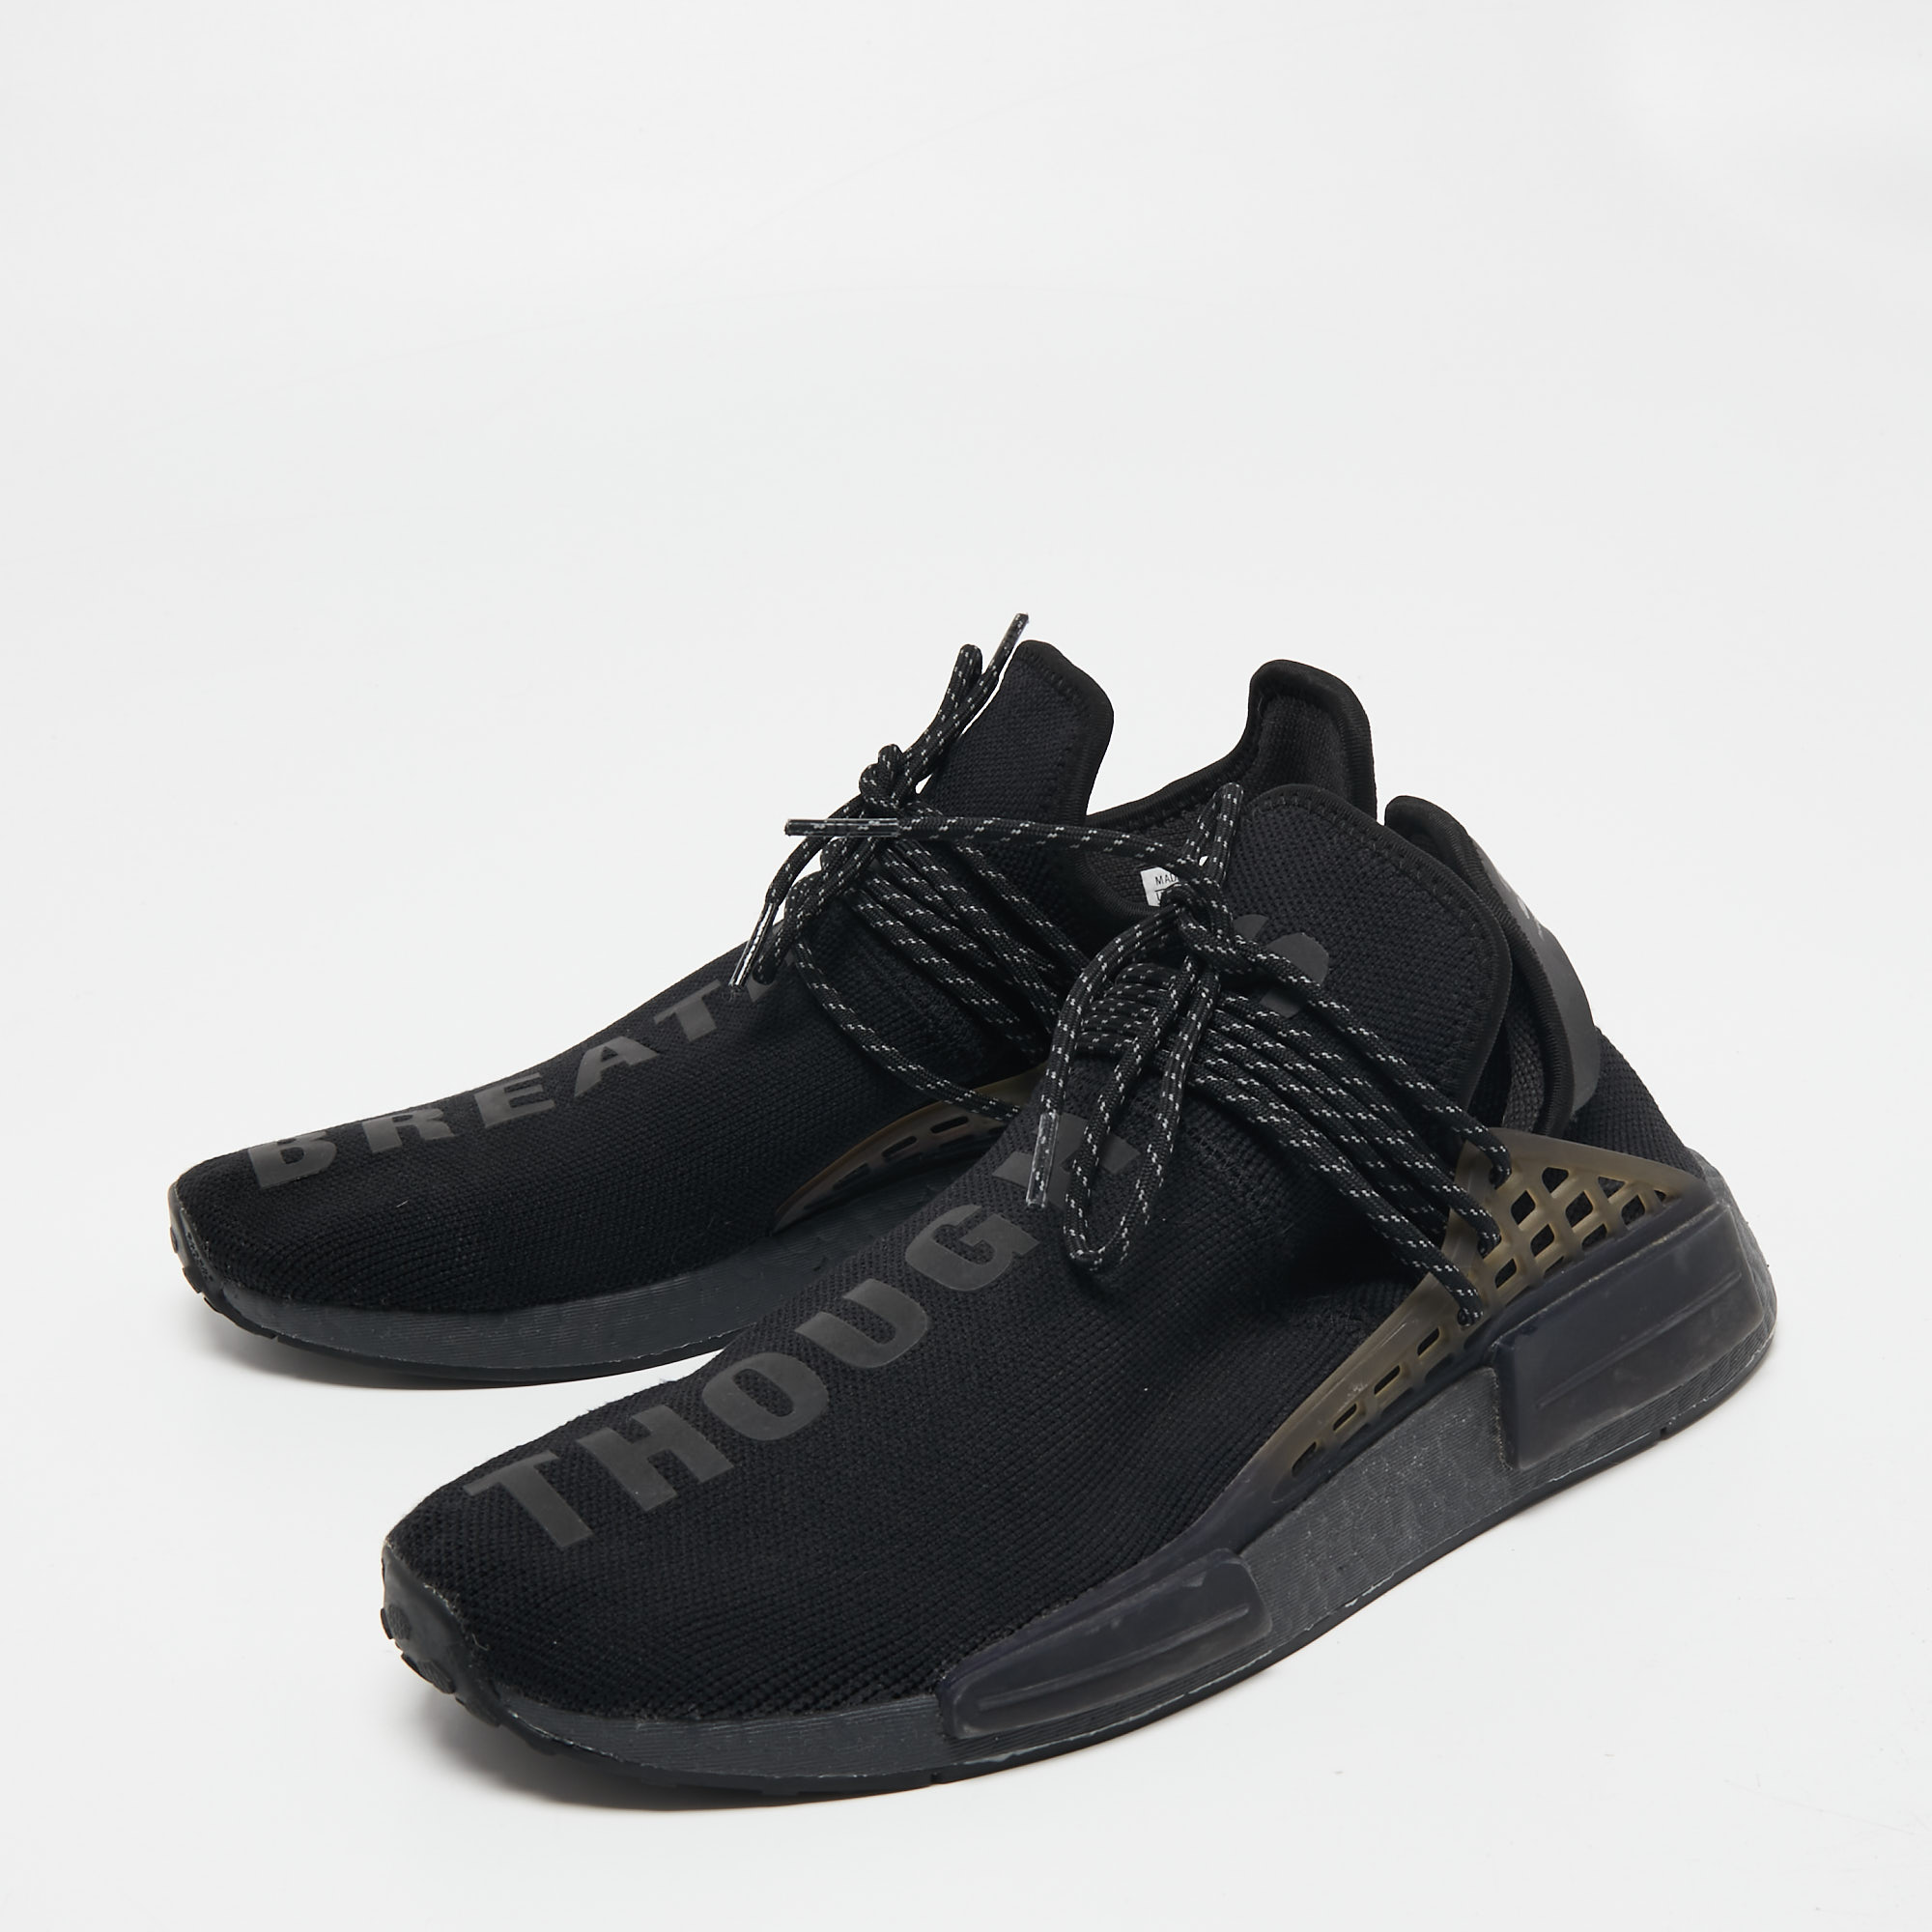 

Adidas x Pharrell Williams Black Knit Fabric Breathe Panelled Low-Top Sneakers Size